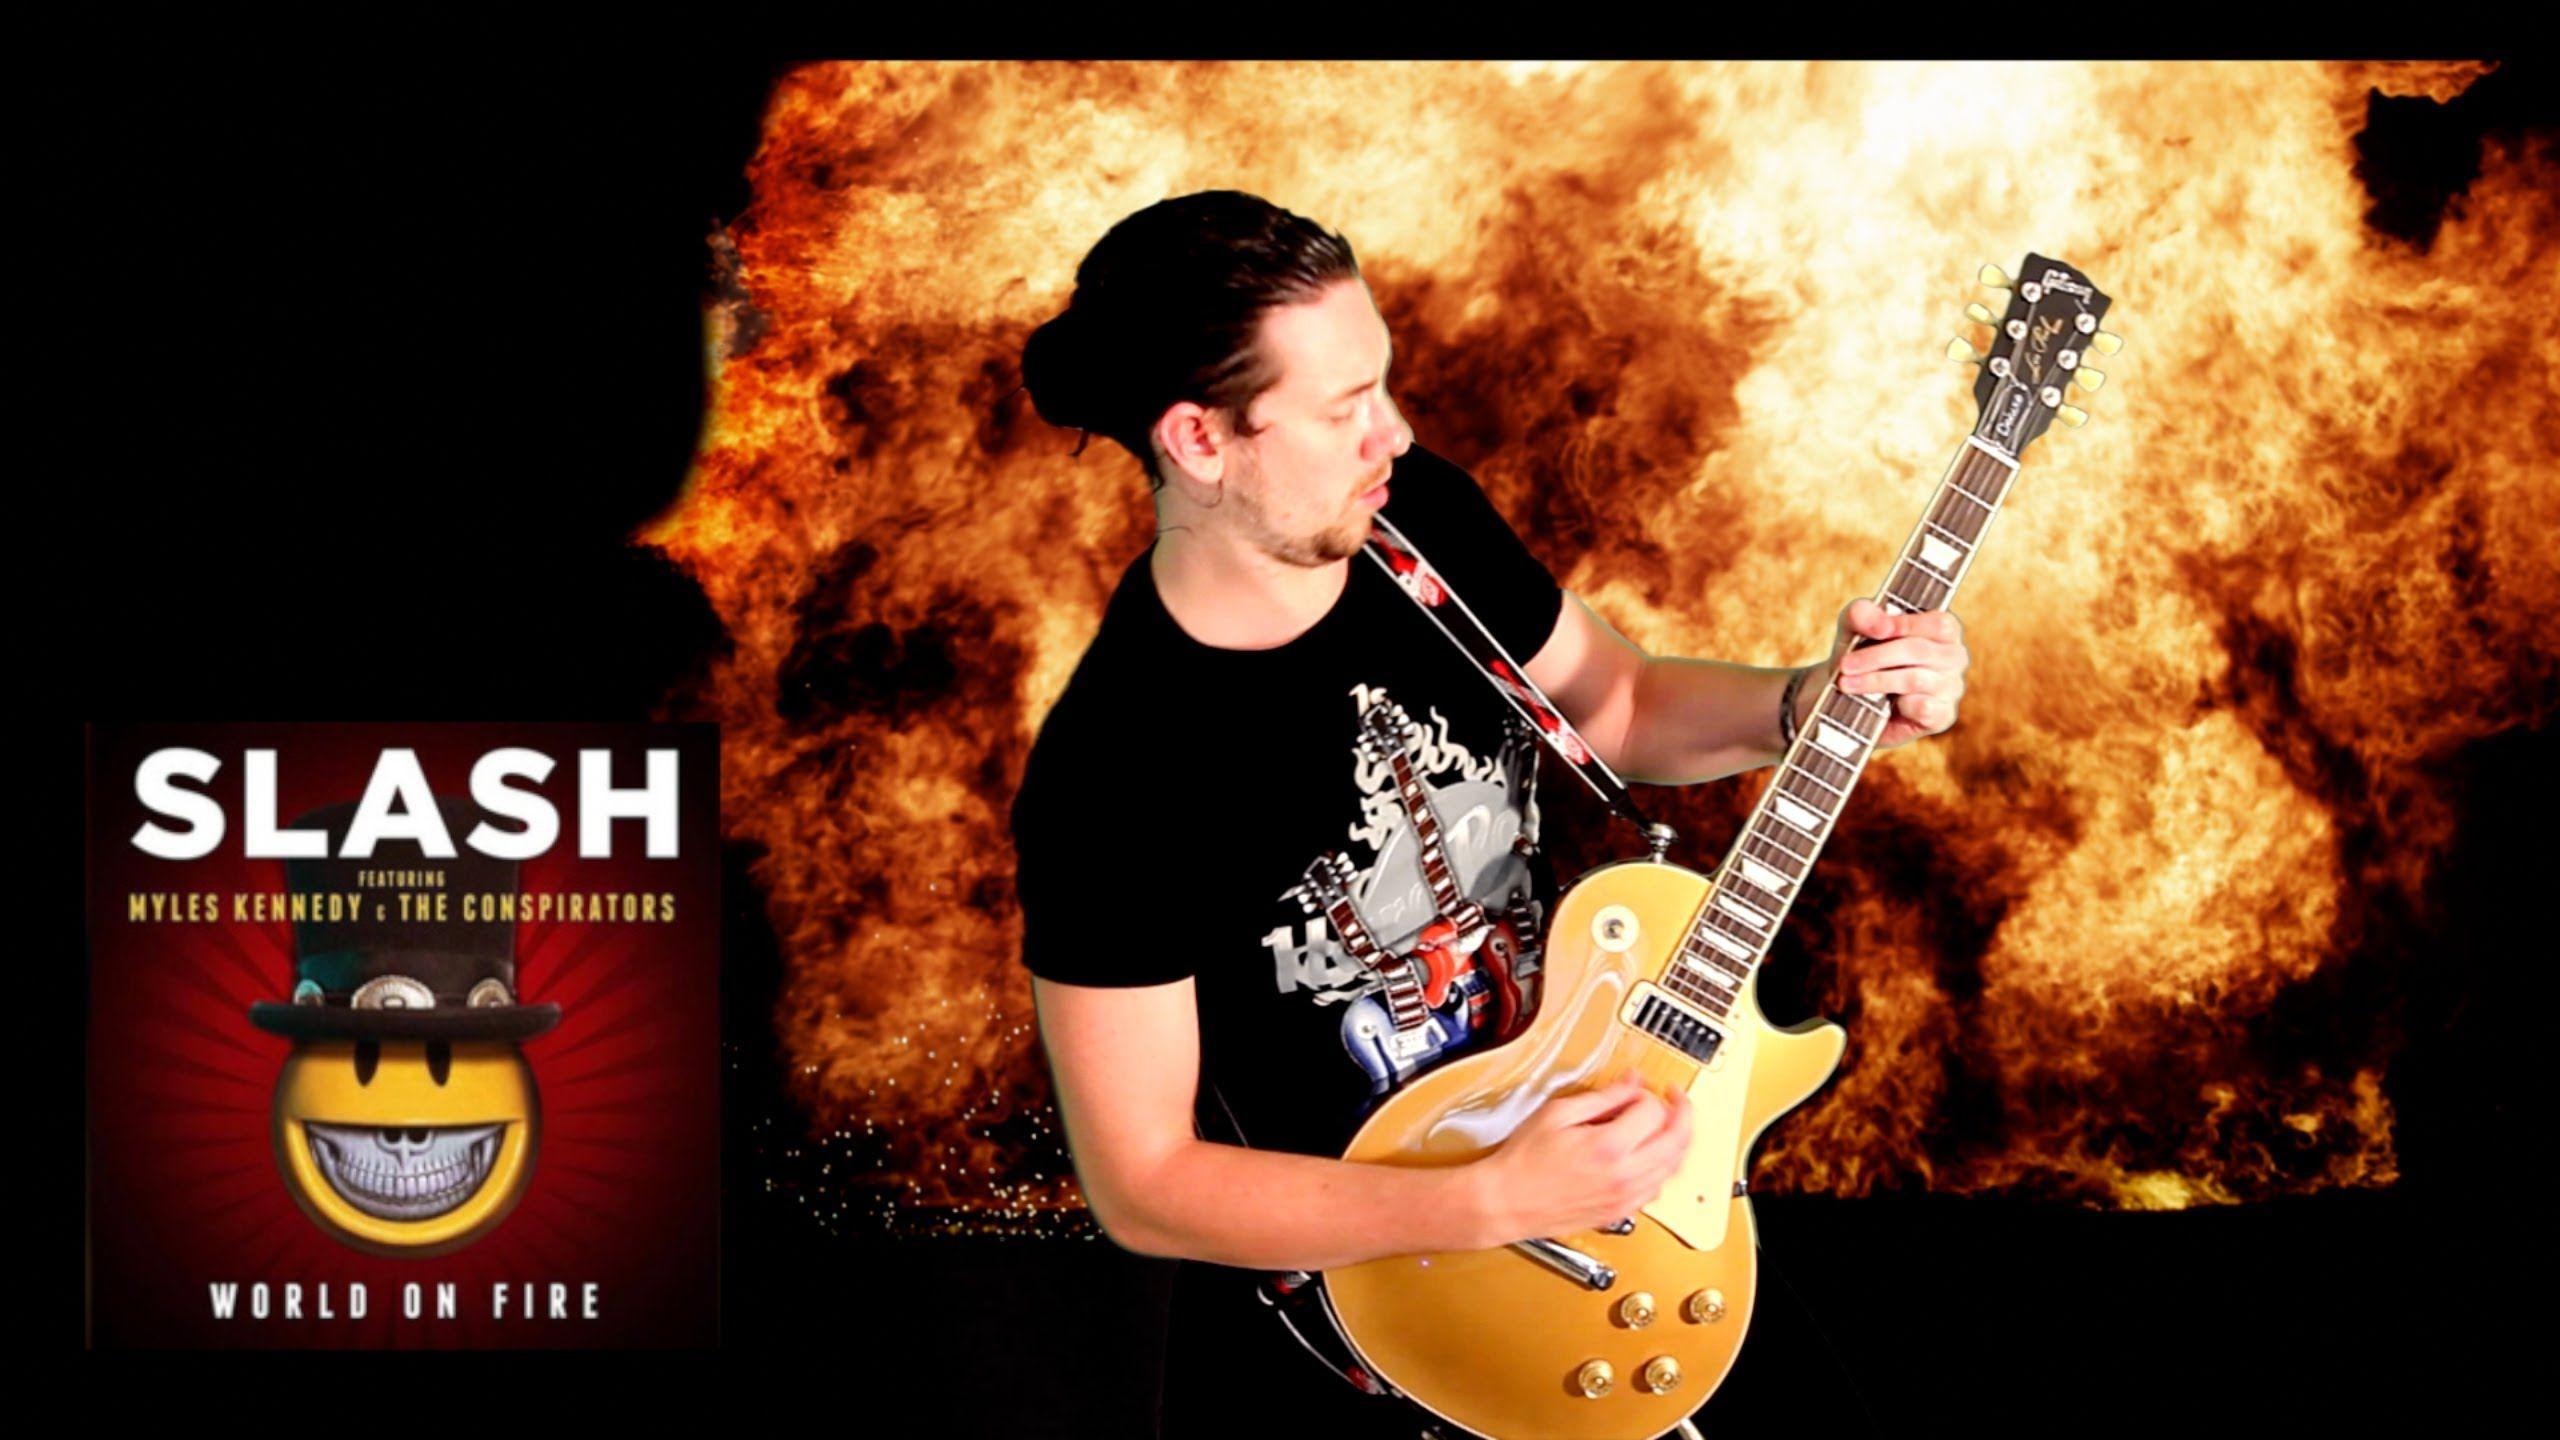 World On Fire' by Slash Feat Myles Kennedy & The Conspirators